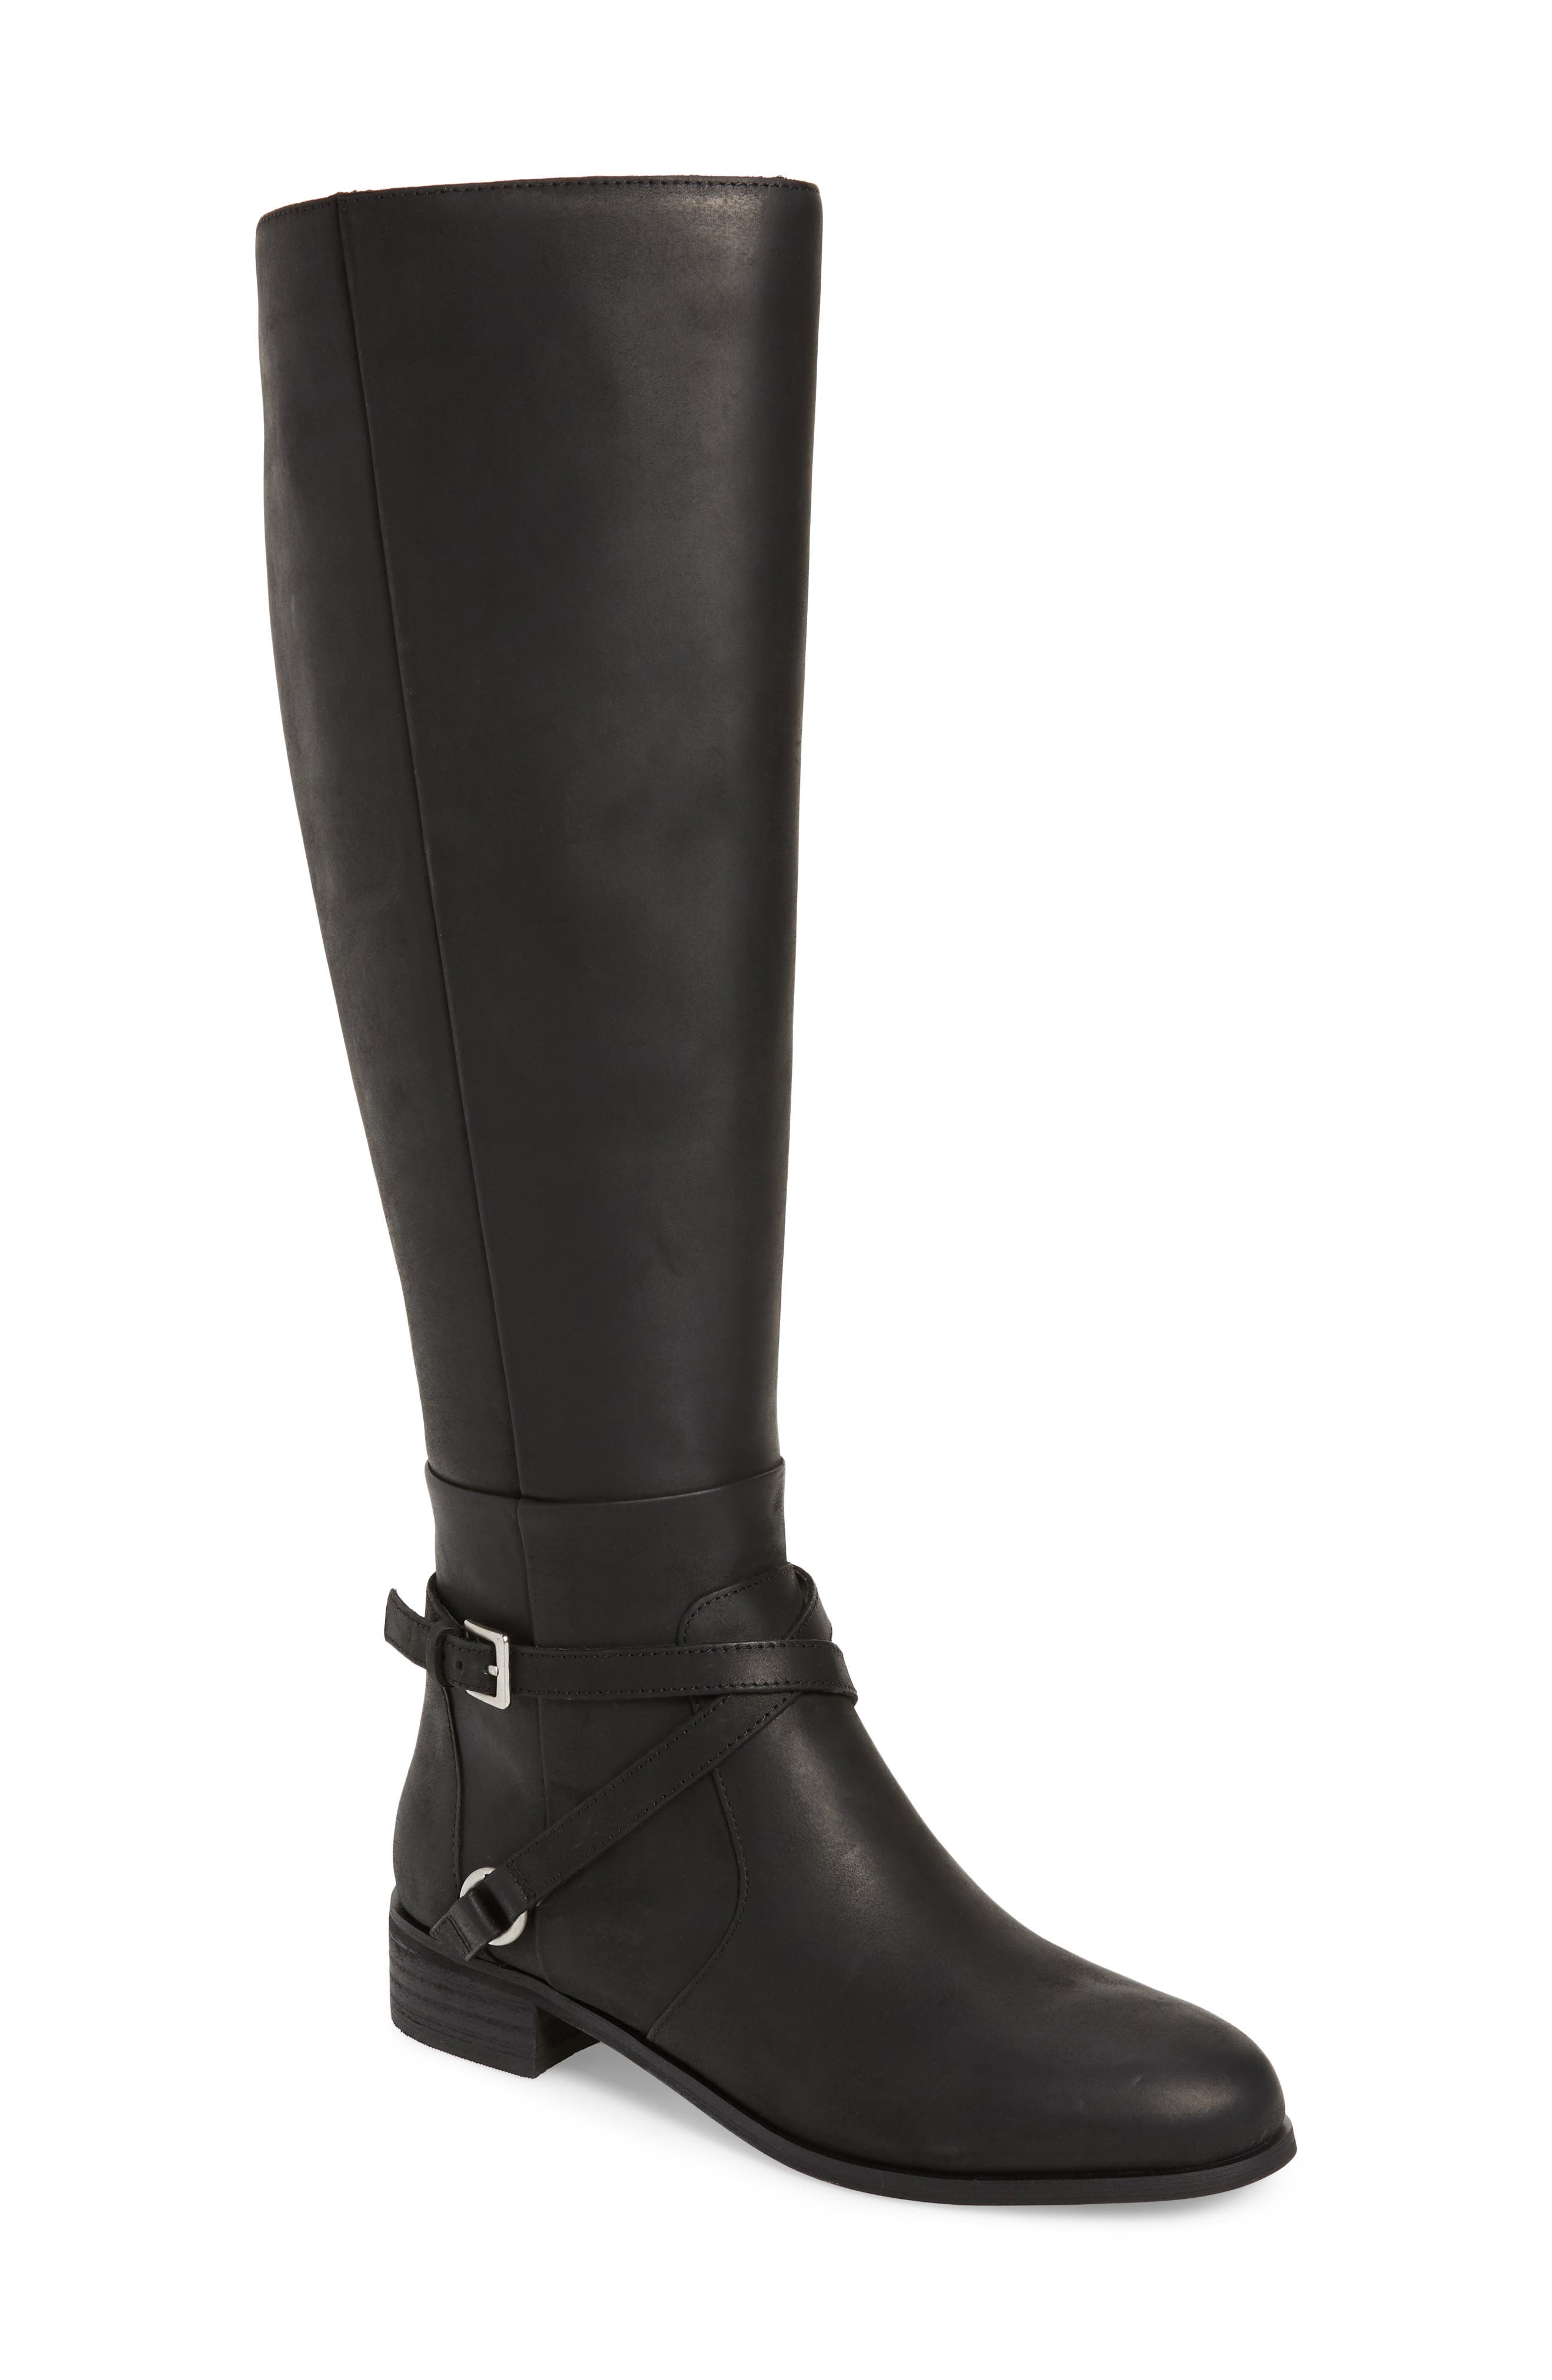 gucci wedge boots